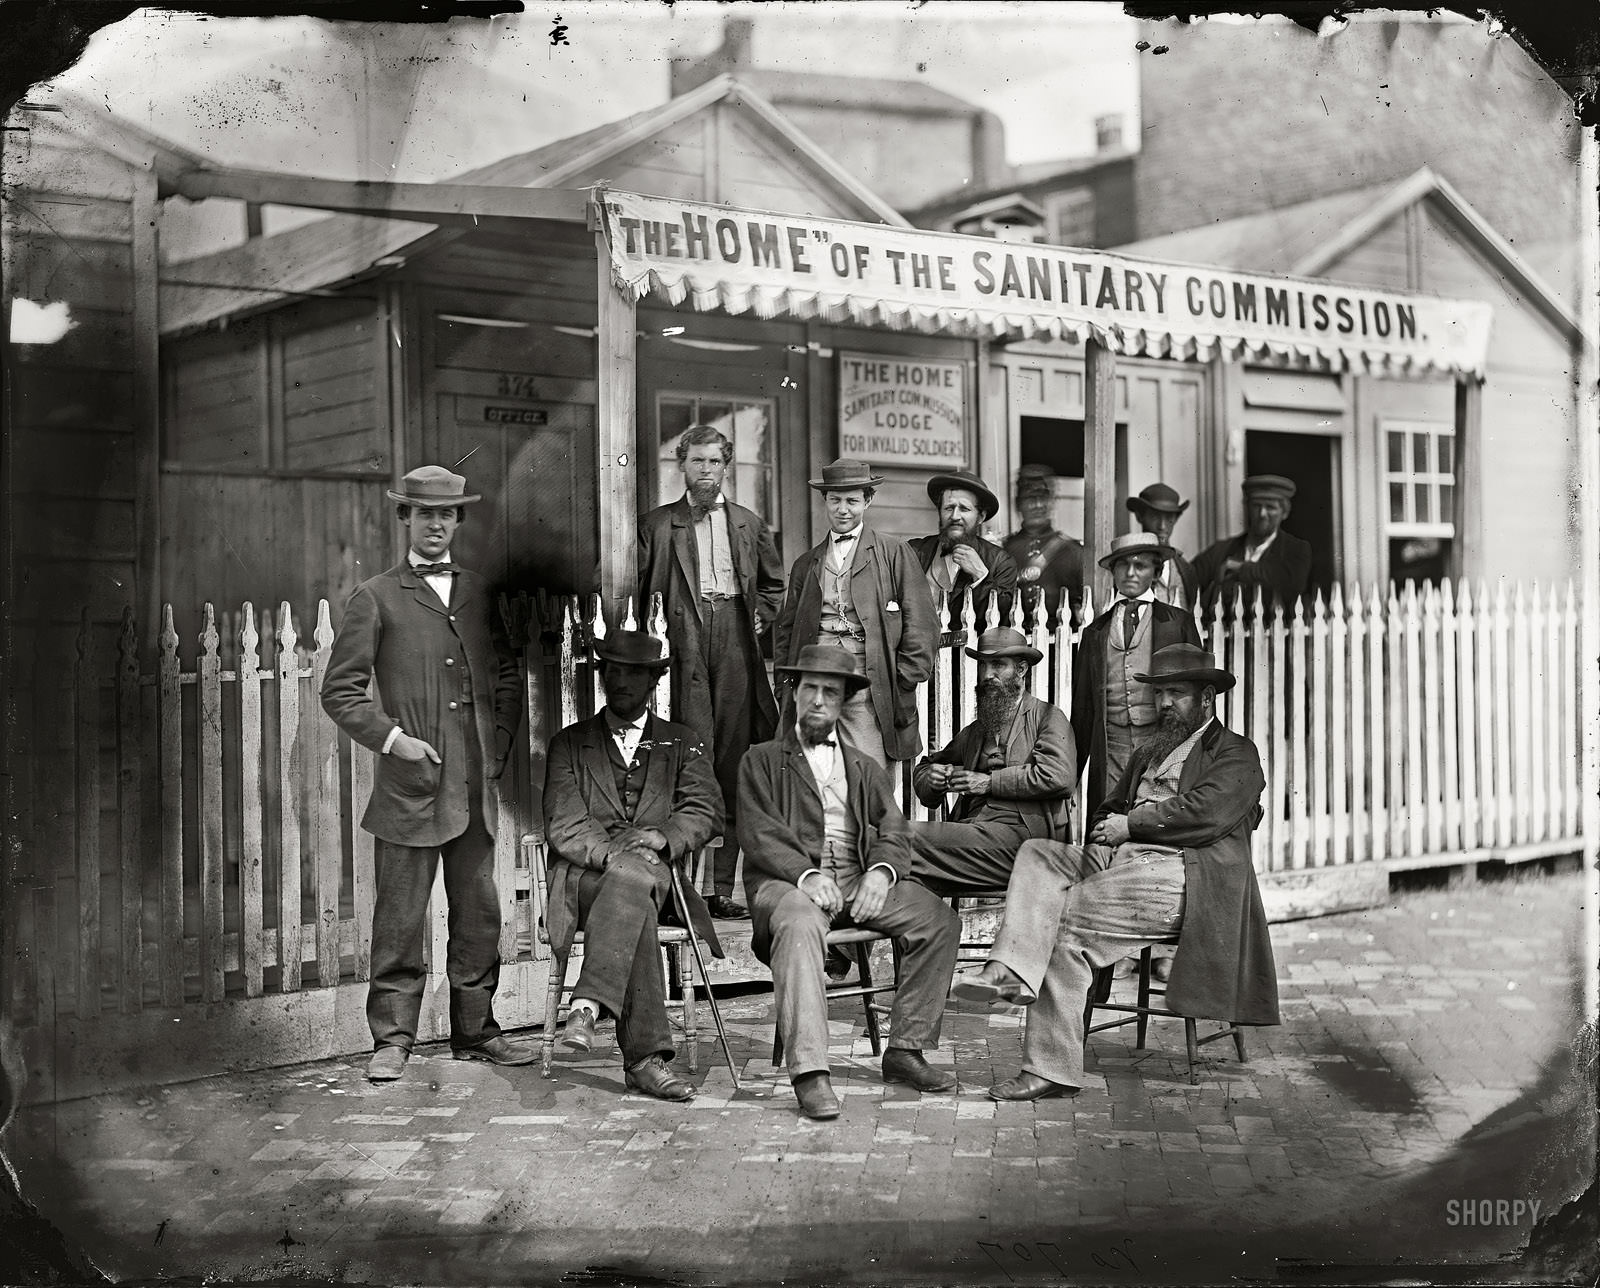 Washington, D.C. Sanitary Commission workers at the entrance of the Home Lodge for Invalid Soldiers, Washington, D.C., 1863.